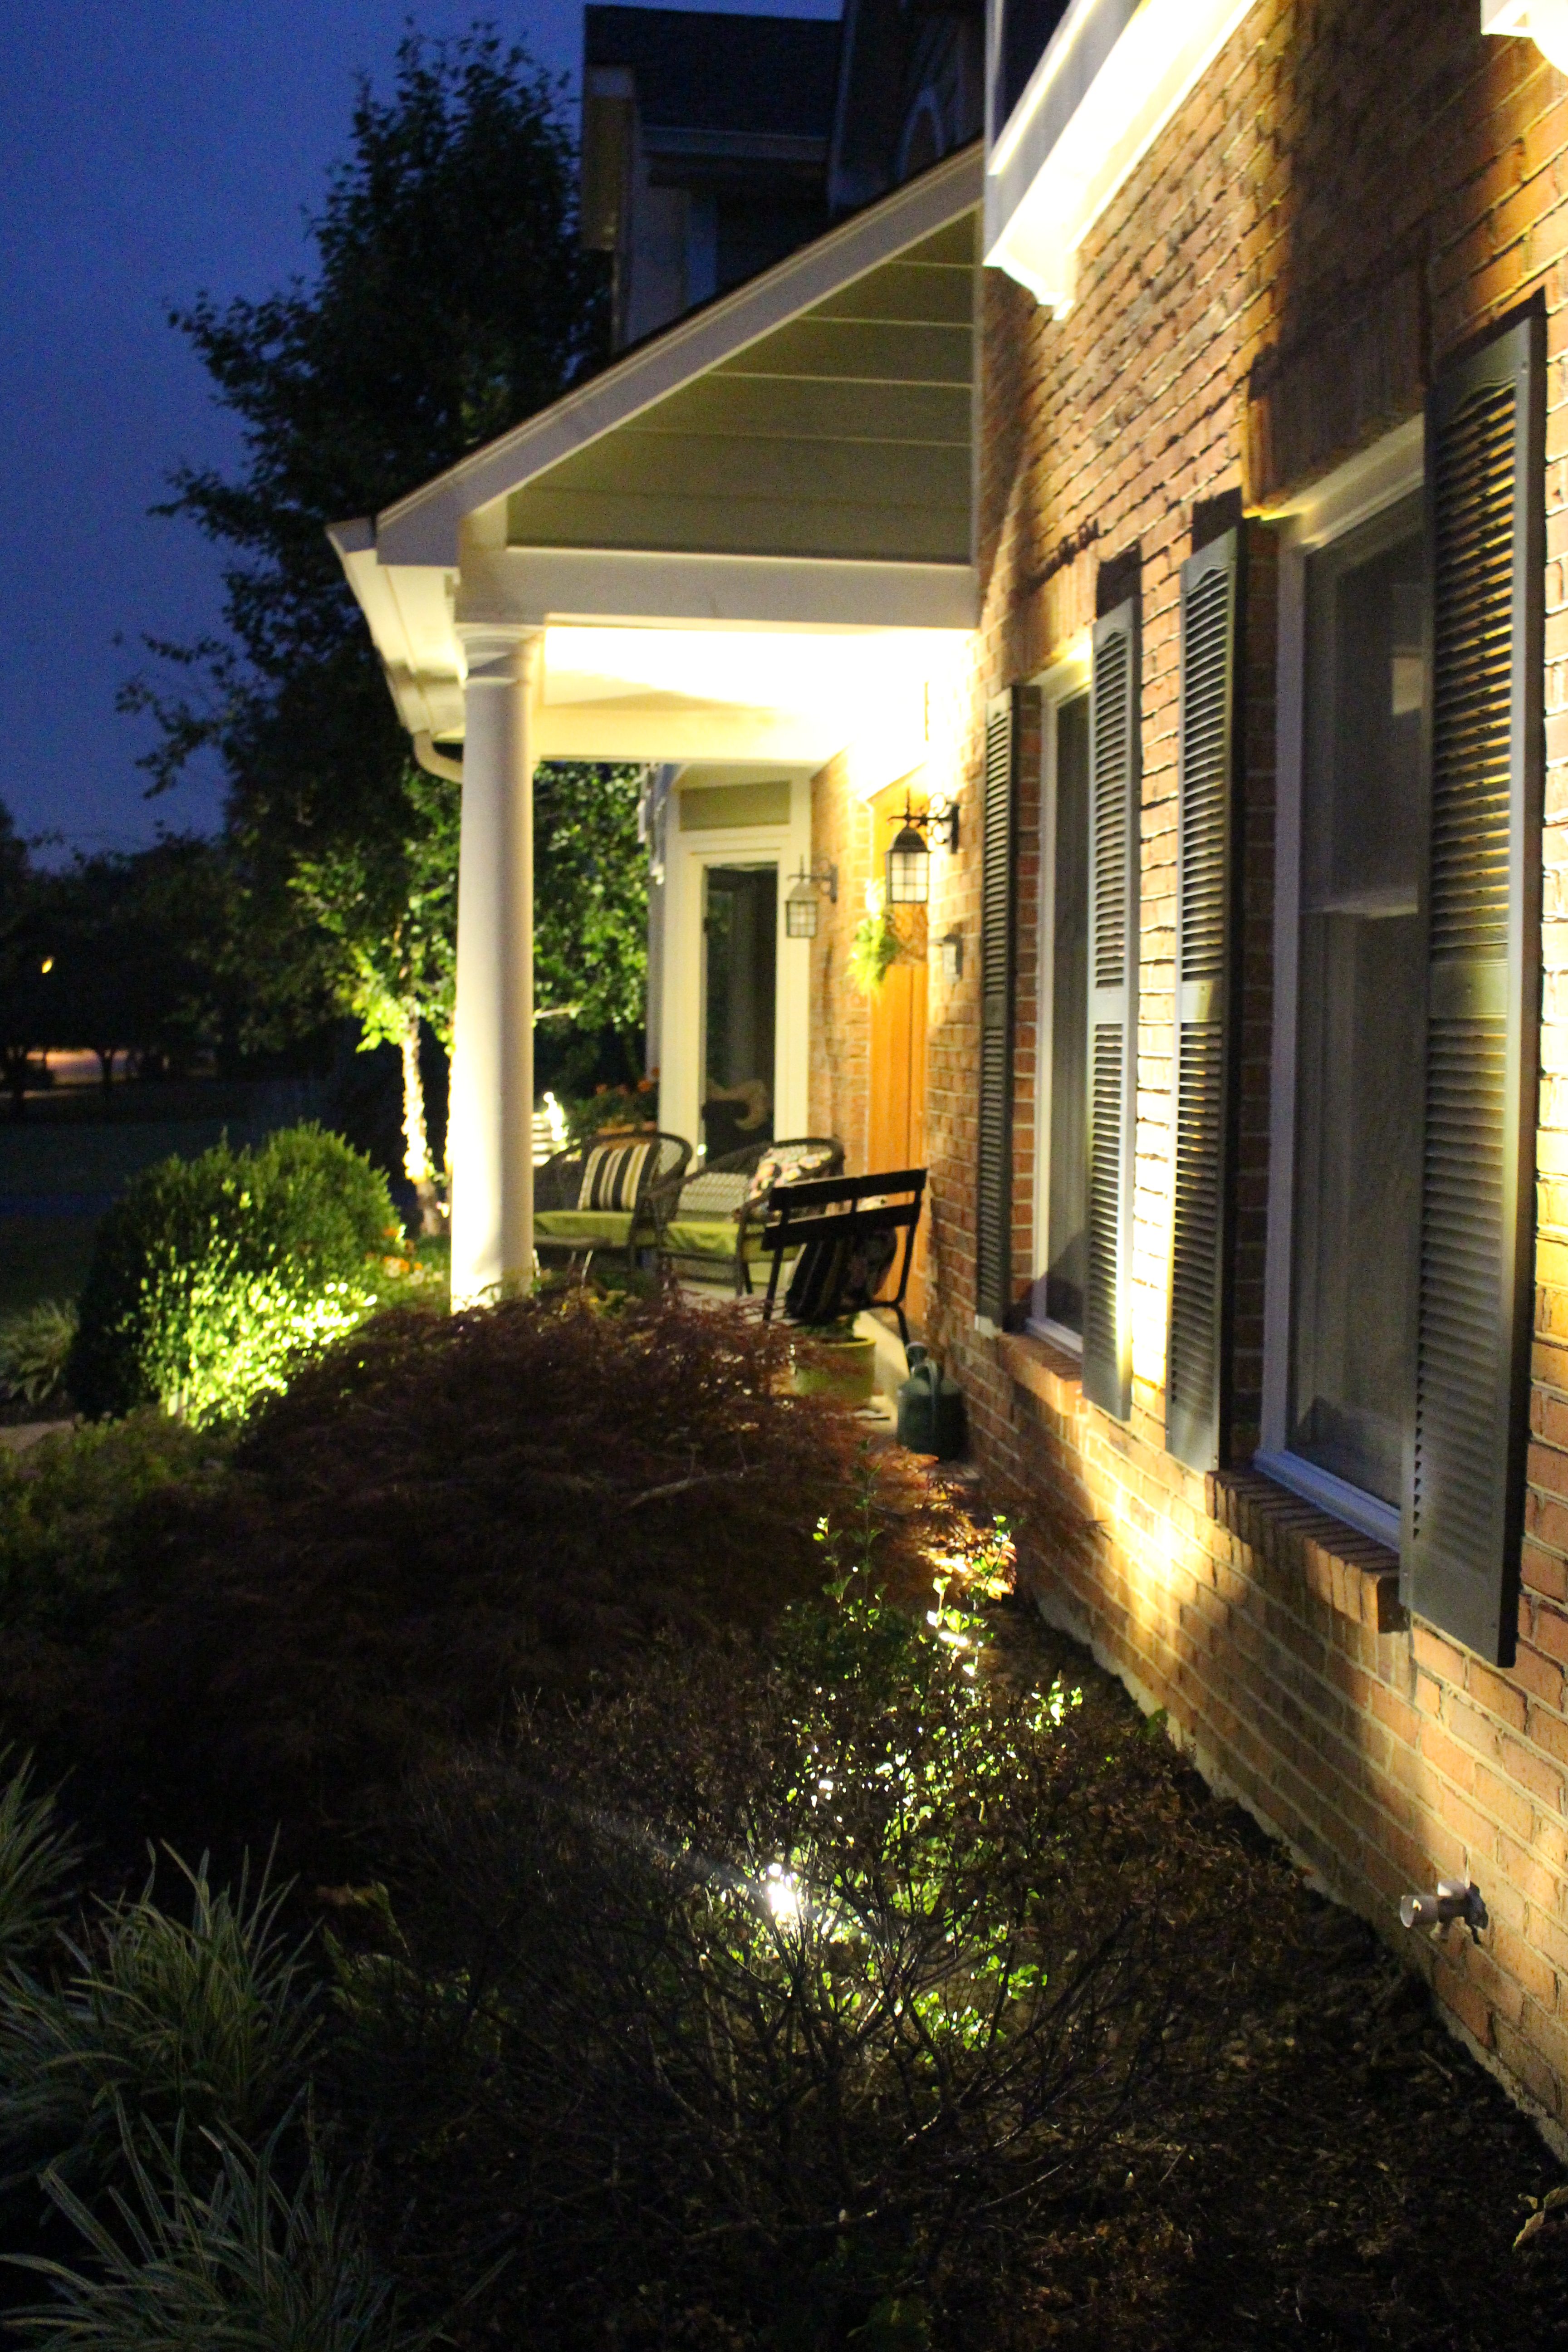 Landscape Lighting Kit from LampsPlus installed for Curb Appeal by www.whitecottagehomeandliving.com